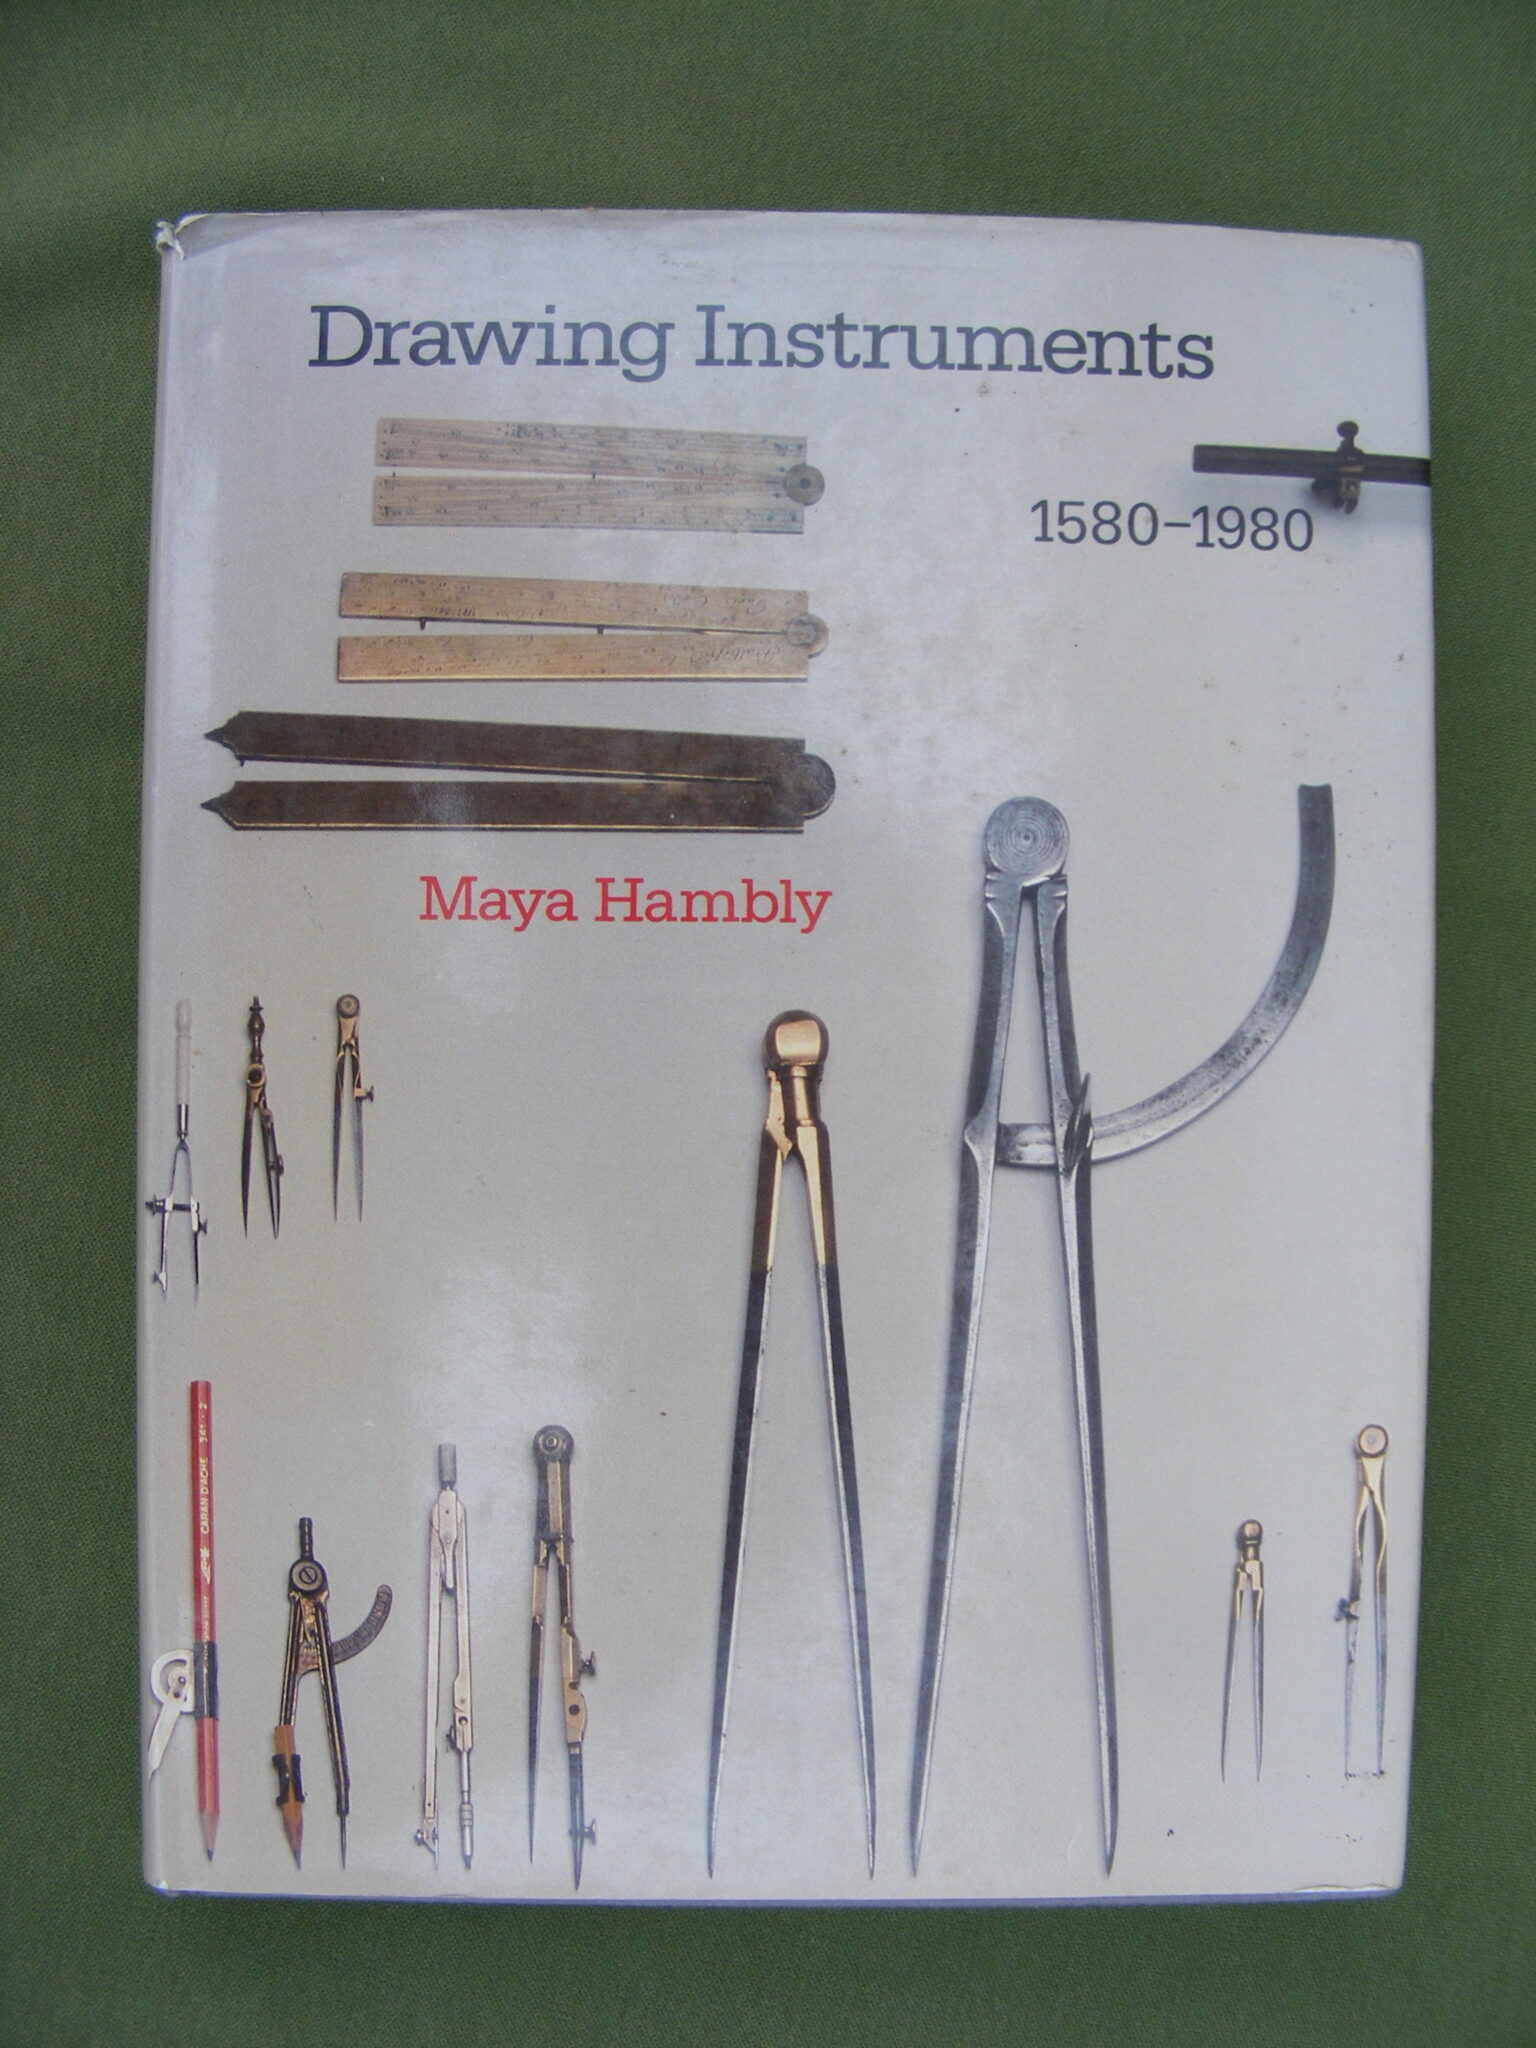 BOOKS ON COLLECTING DRAWING INSTRUMENTS